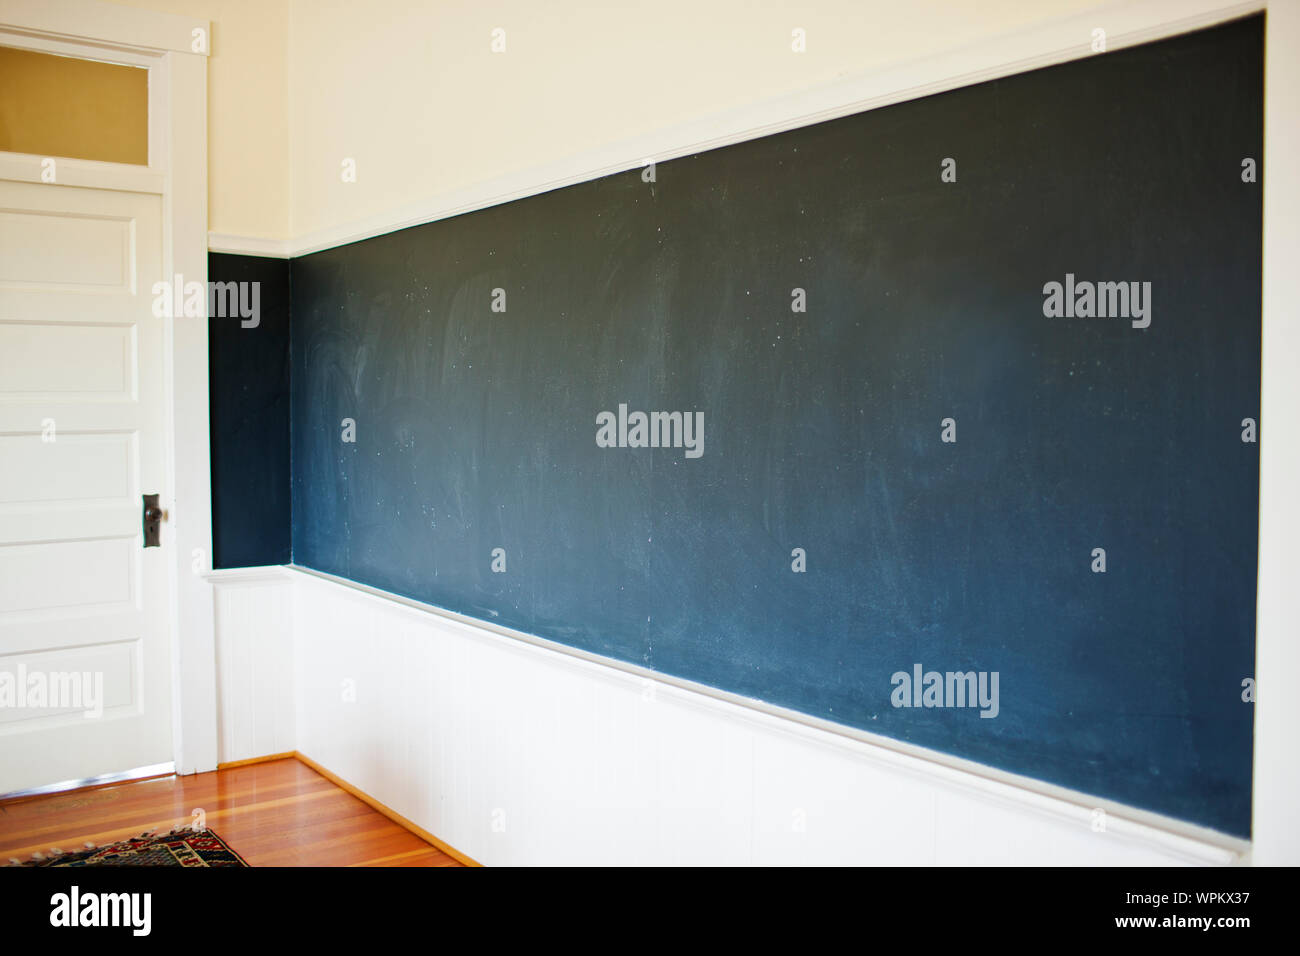 Empty chalkboard covering the wall of a classroom. Stock Photo